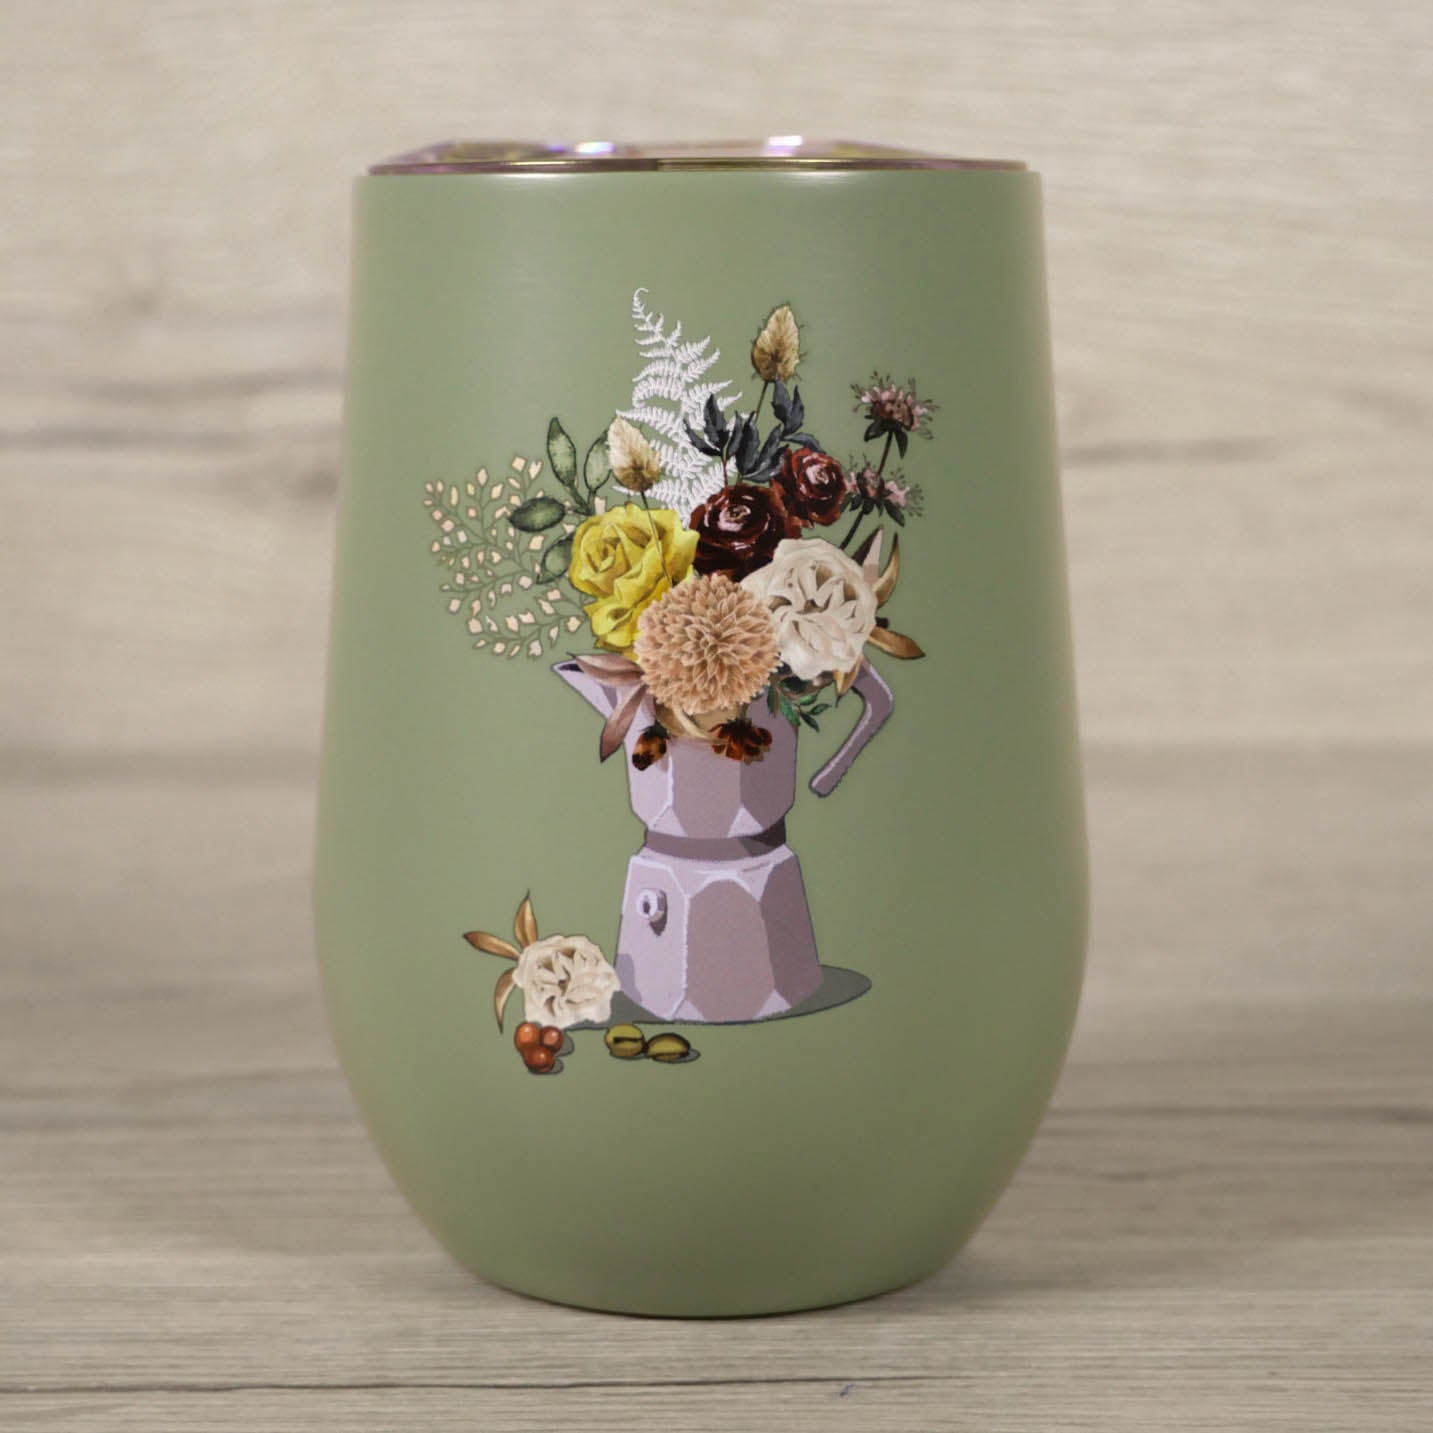 Thermobecher - Bioloco office - Mocca Flowers - Mint, Bunt - To Go Becher - chic.mic